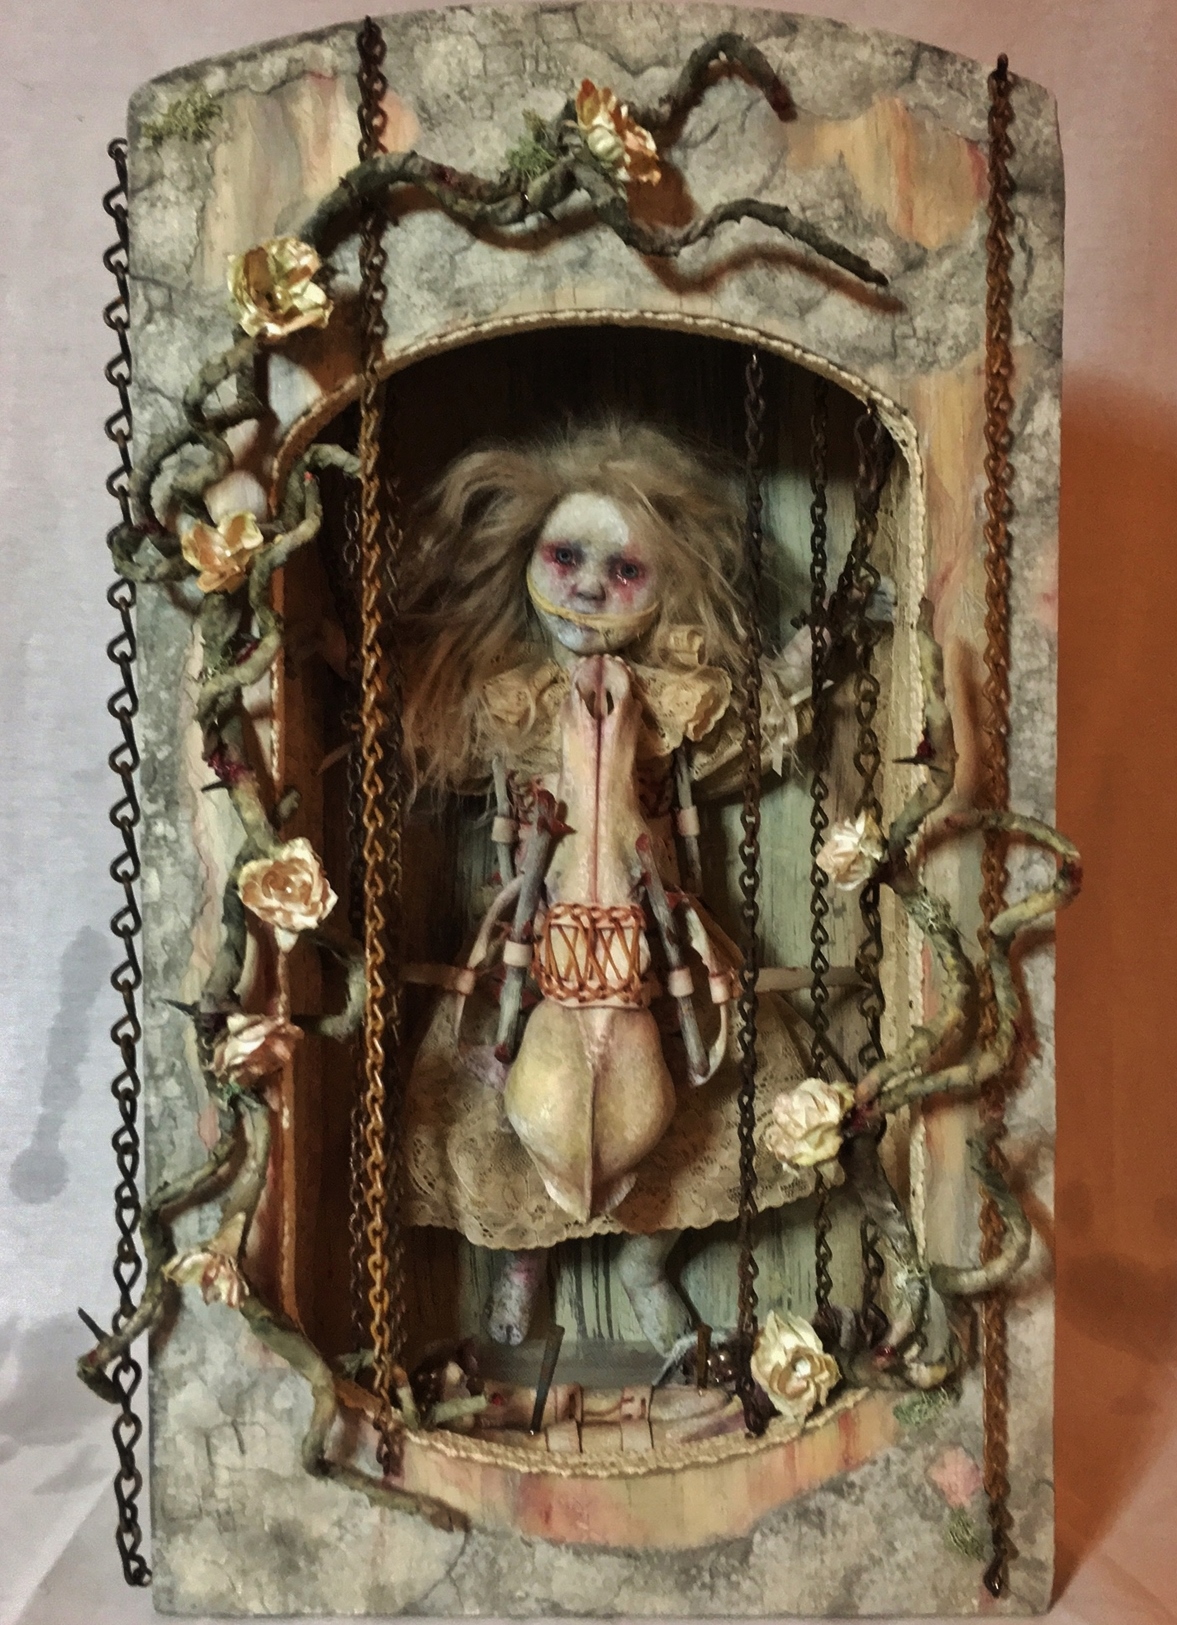 mixed media assemblage shadow box earth tones with an imprisoned goth repainted doll.